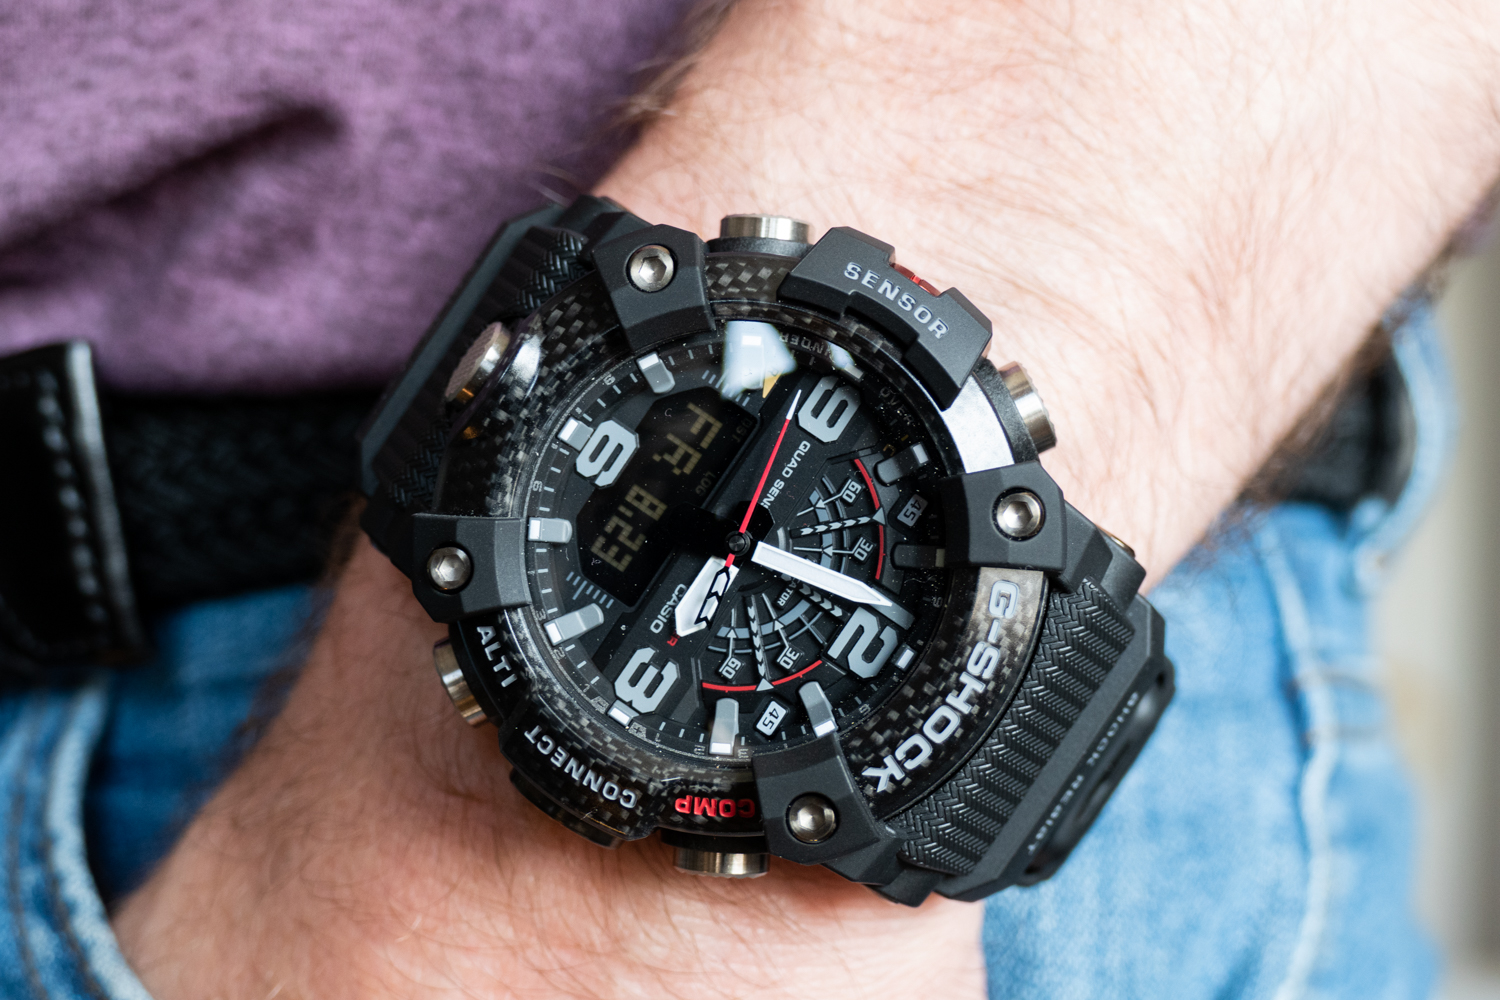 The Carbon-Cased G-Shock Mudmaster Watch is Still as Extreme as